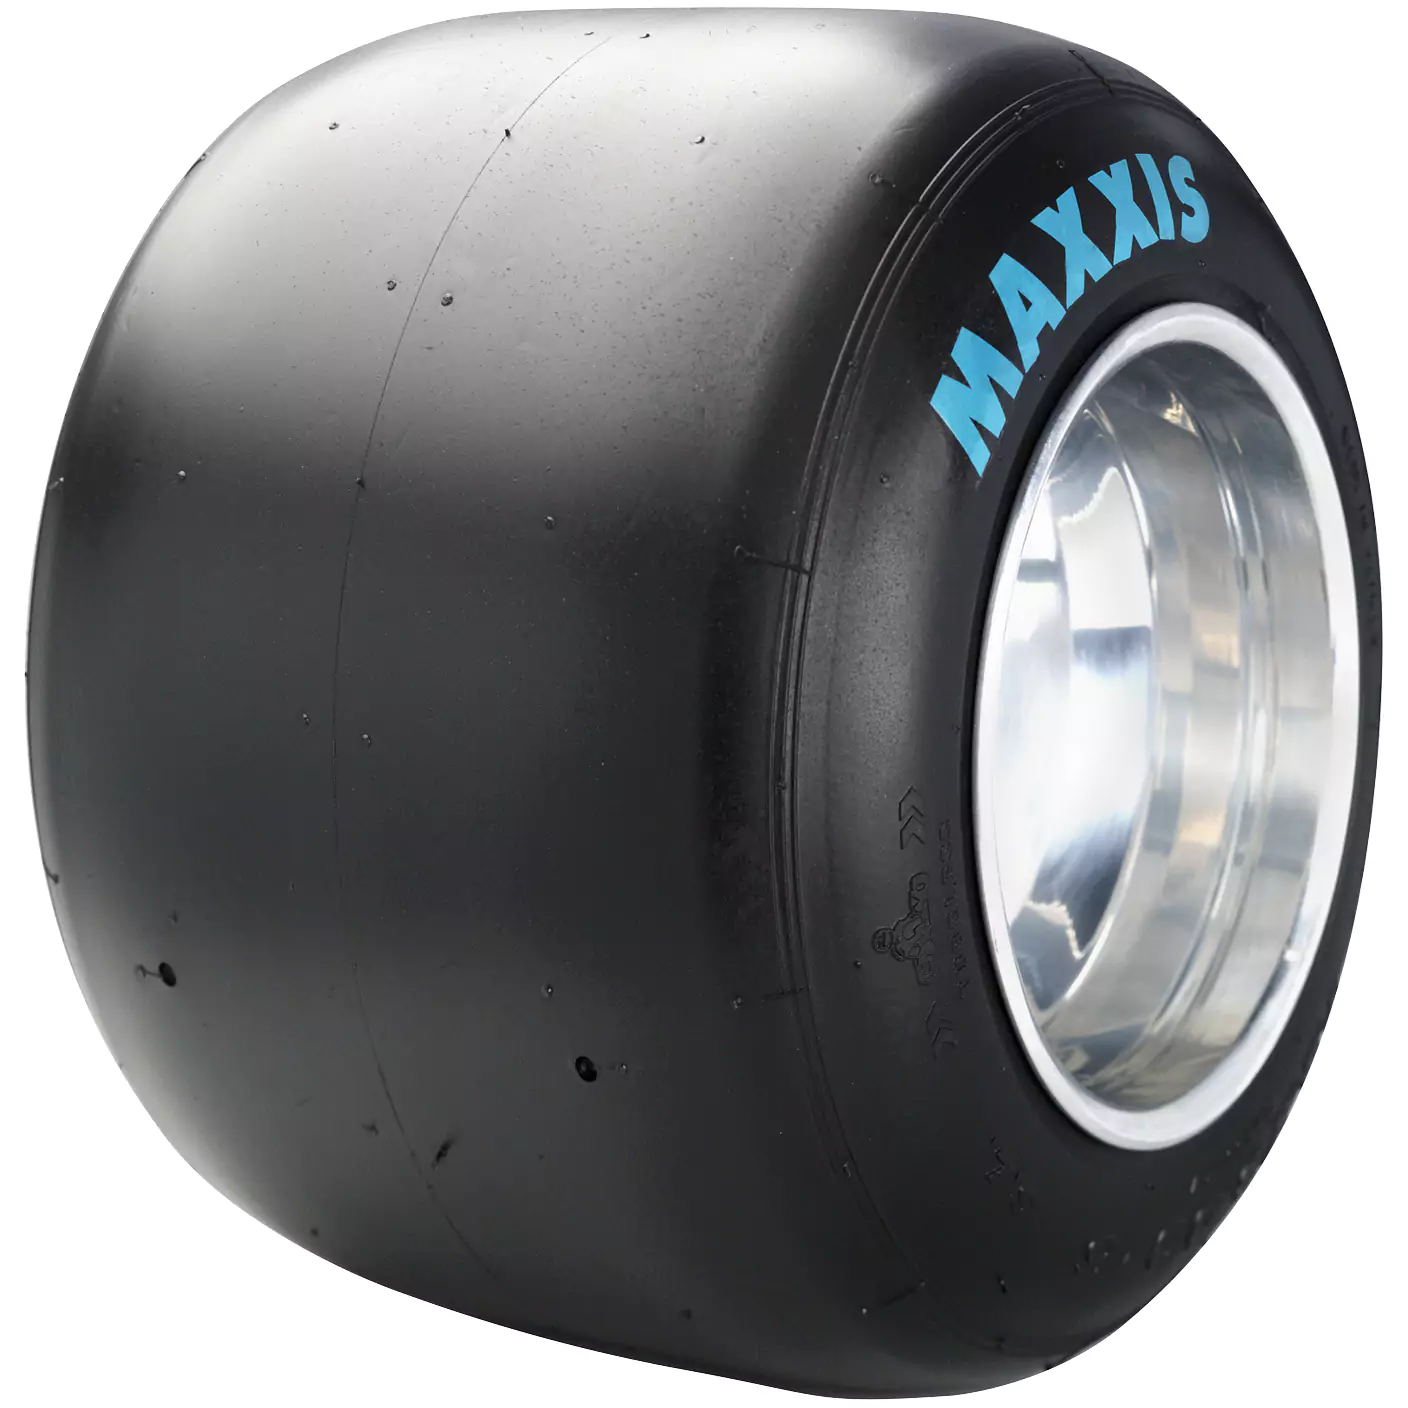 Maxxis HT3 M190 kart tire with blue Maxxis lettering.